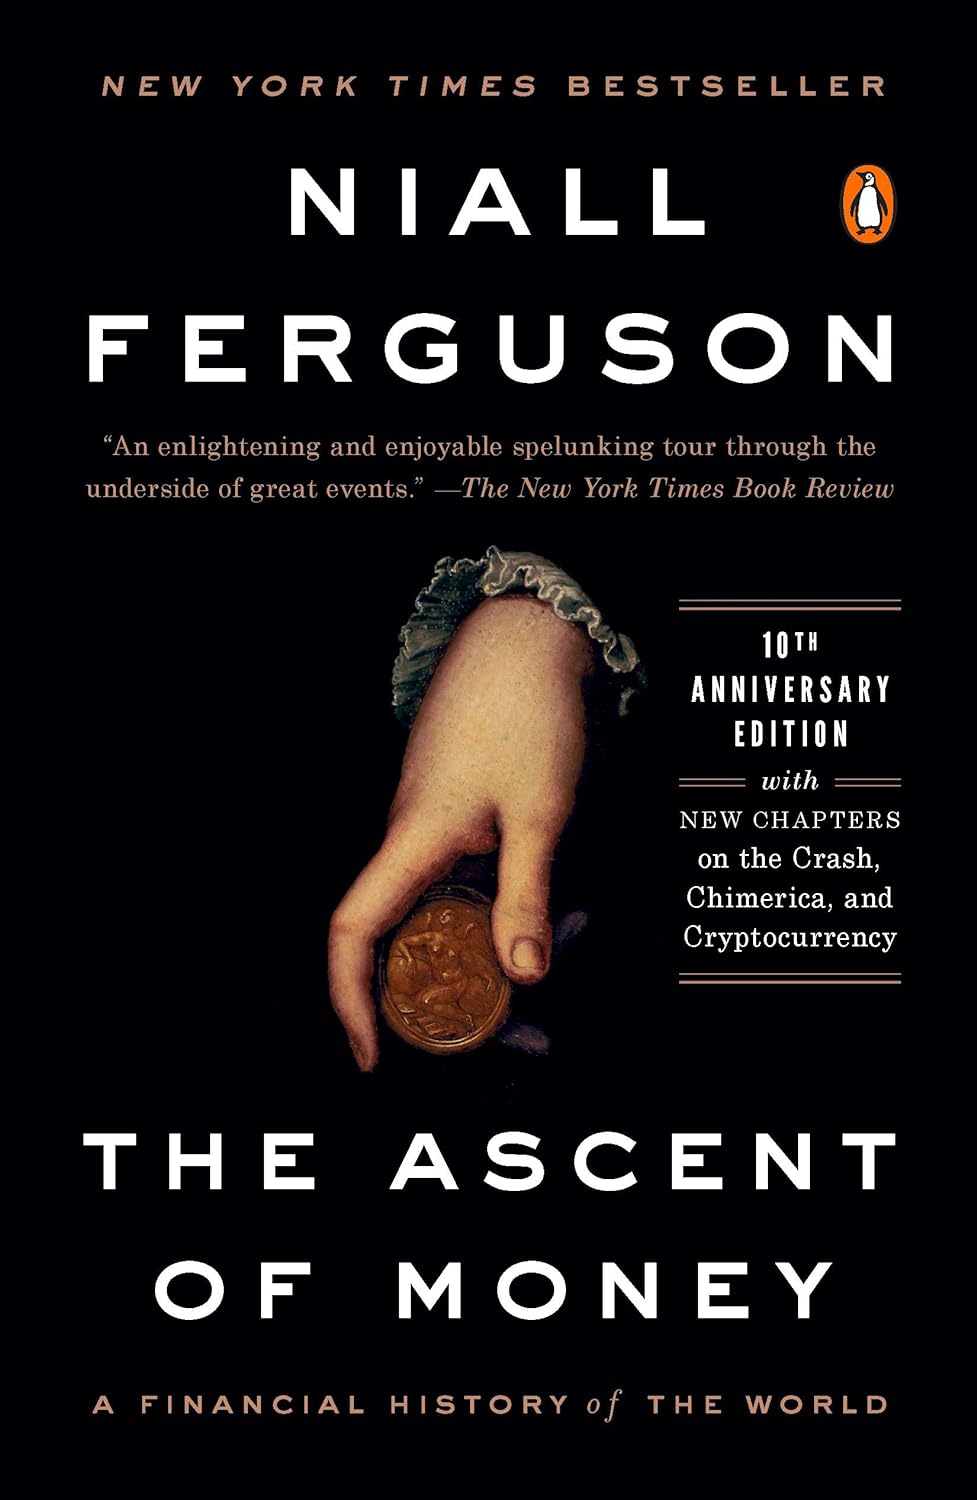 Book cover: "The Ascent of Money."